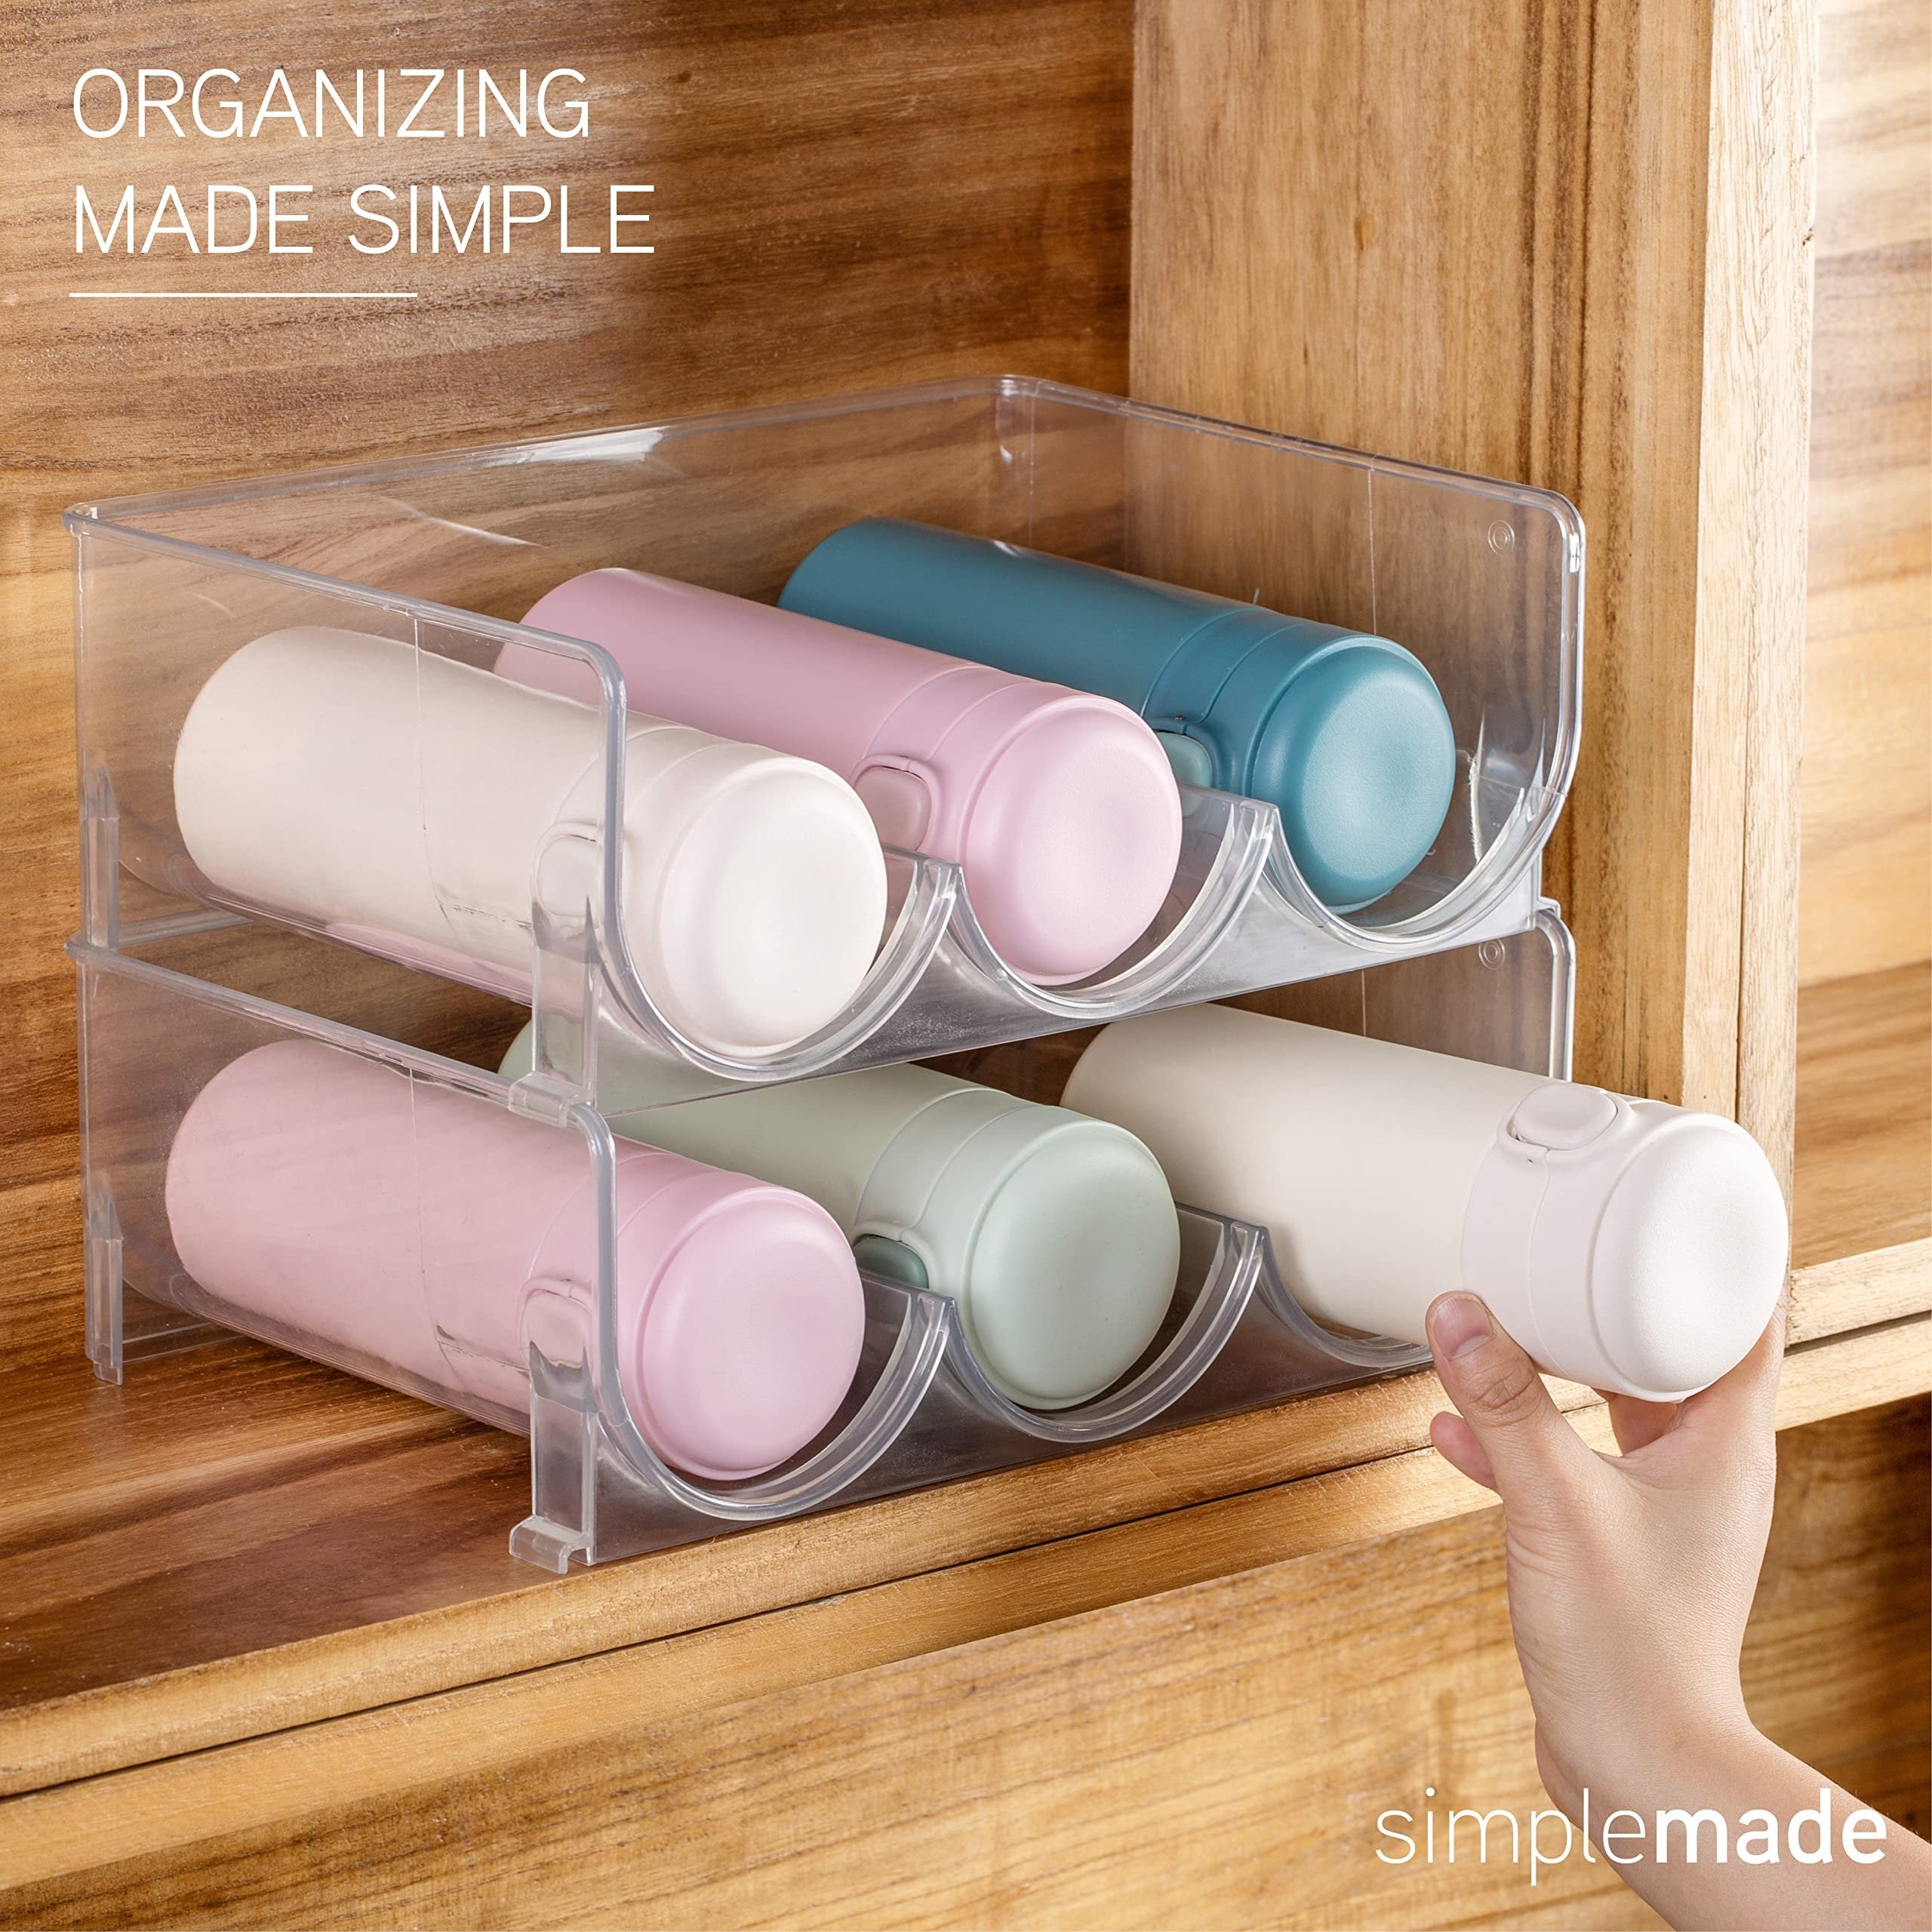 SIMPLEMADE Clear Water Bottle Organizer - Storage Holder for Kitchen Organization - Plastic Cup Rack Shelf for Insulated Tumbler Sports Flask Bottles Kids Water Bottle Travel Mug for Kitchen Cabinets